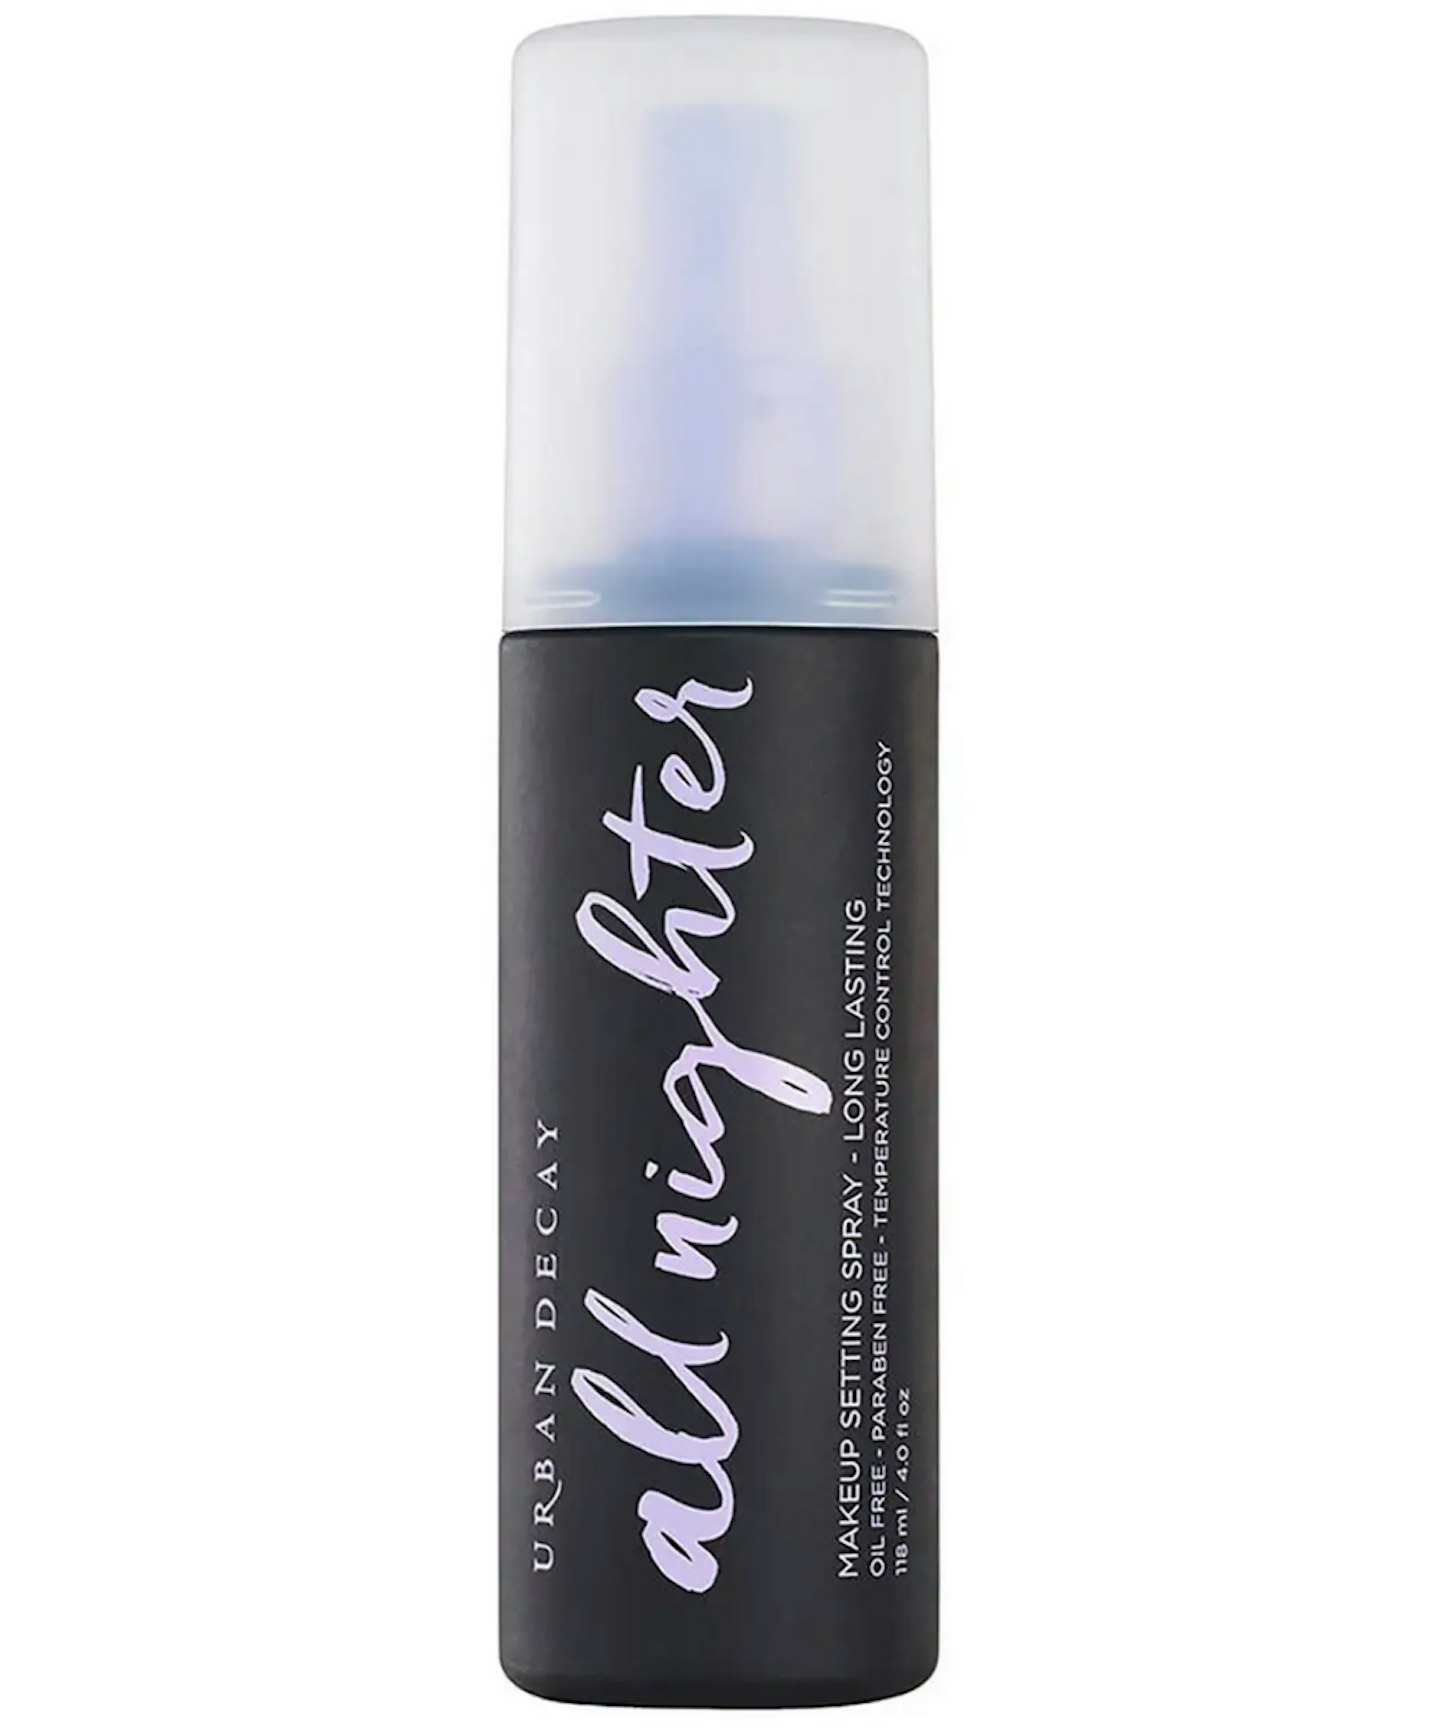 A picture of the Urban Decay All Nighter Setting Spray